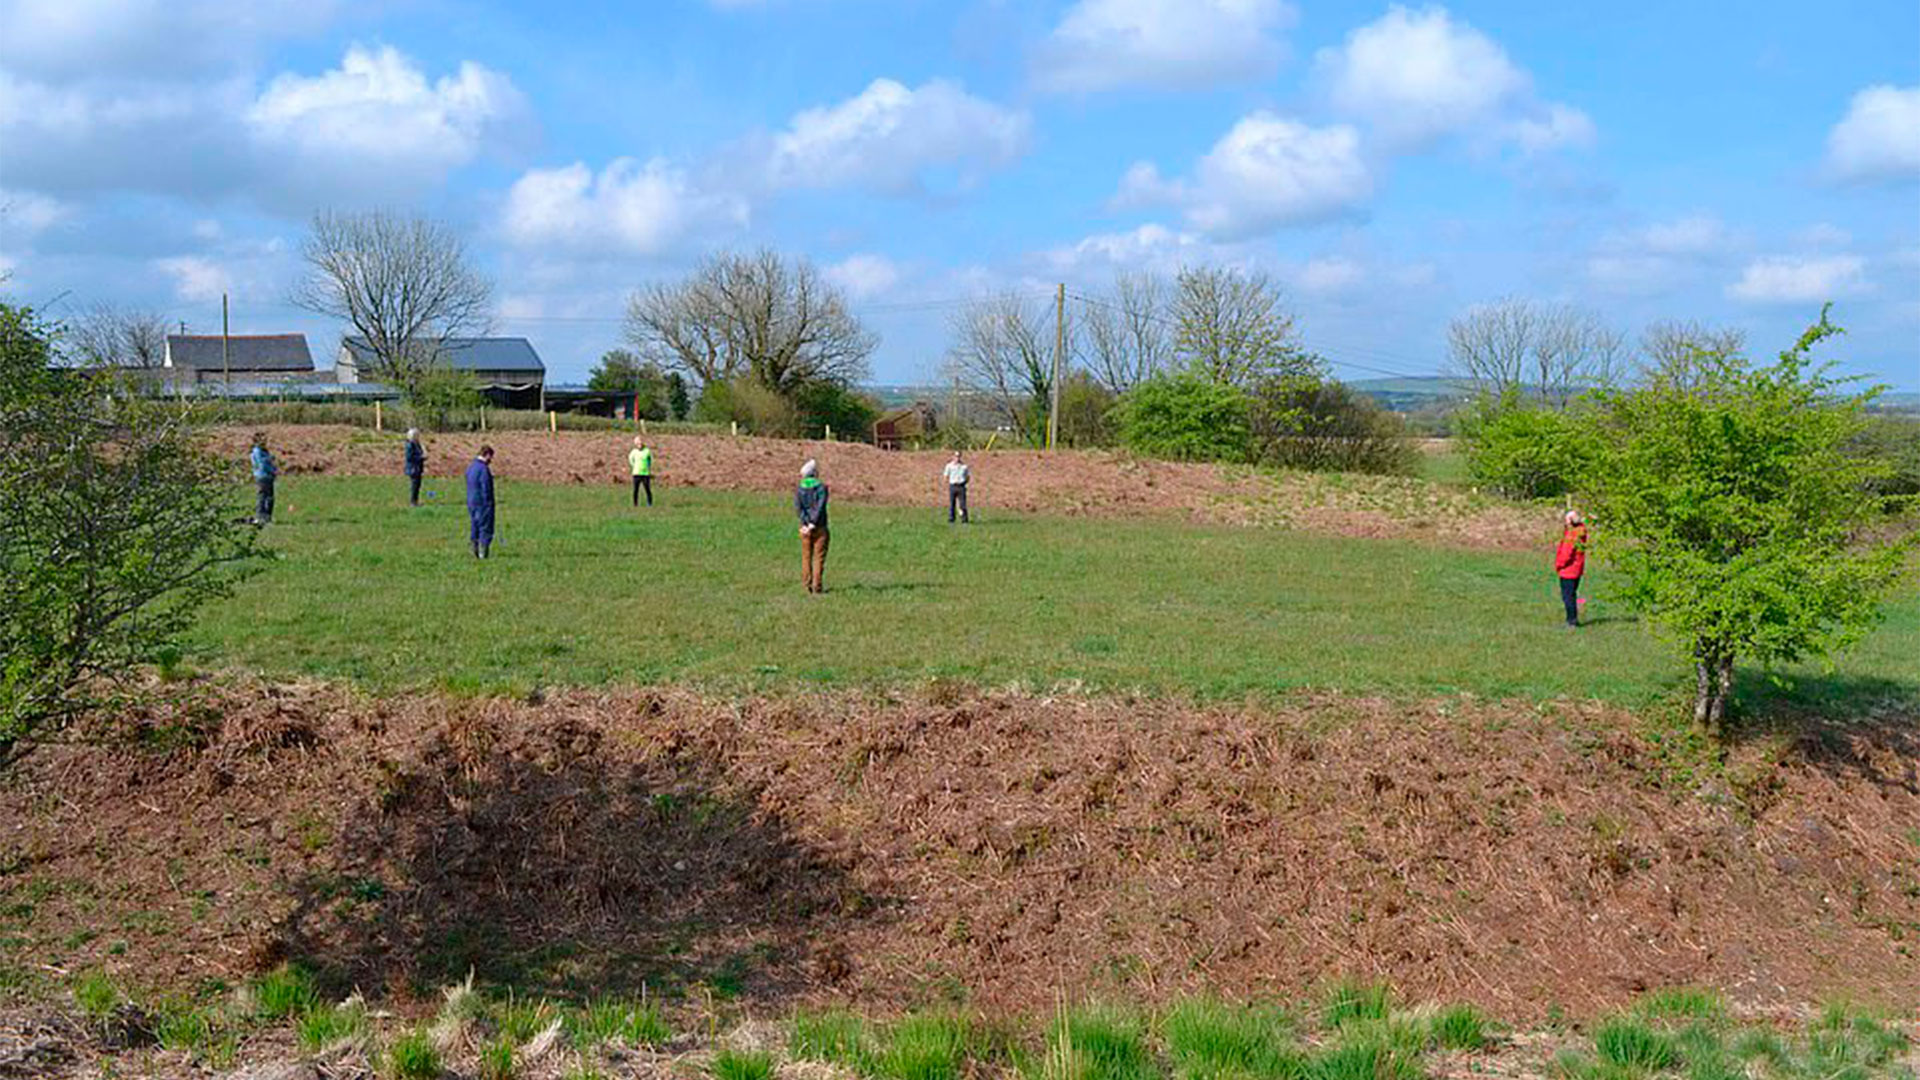 Thirteen volunteers spent 111 hours of their time clearing weeds and brush that hid the henge.